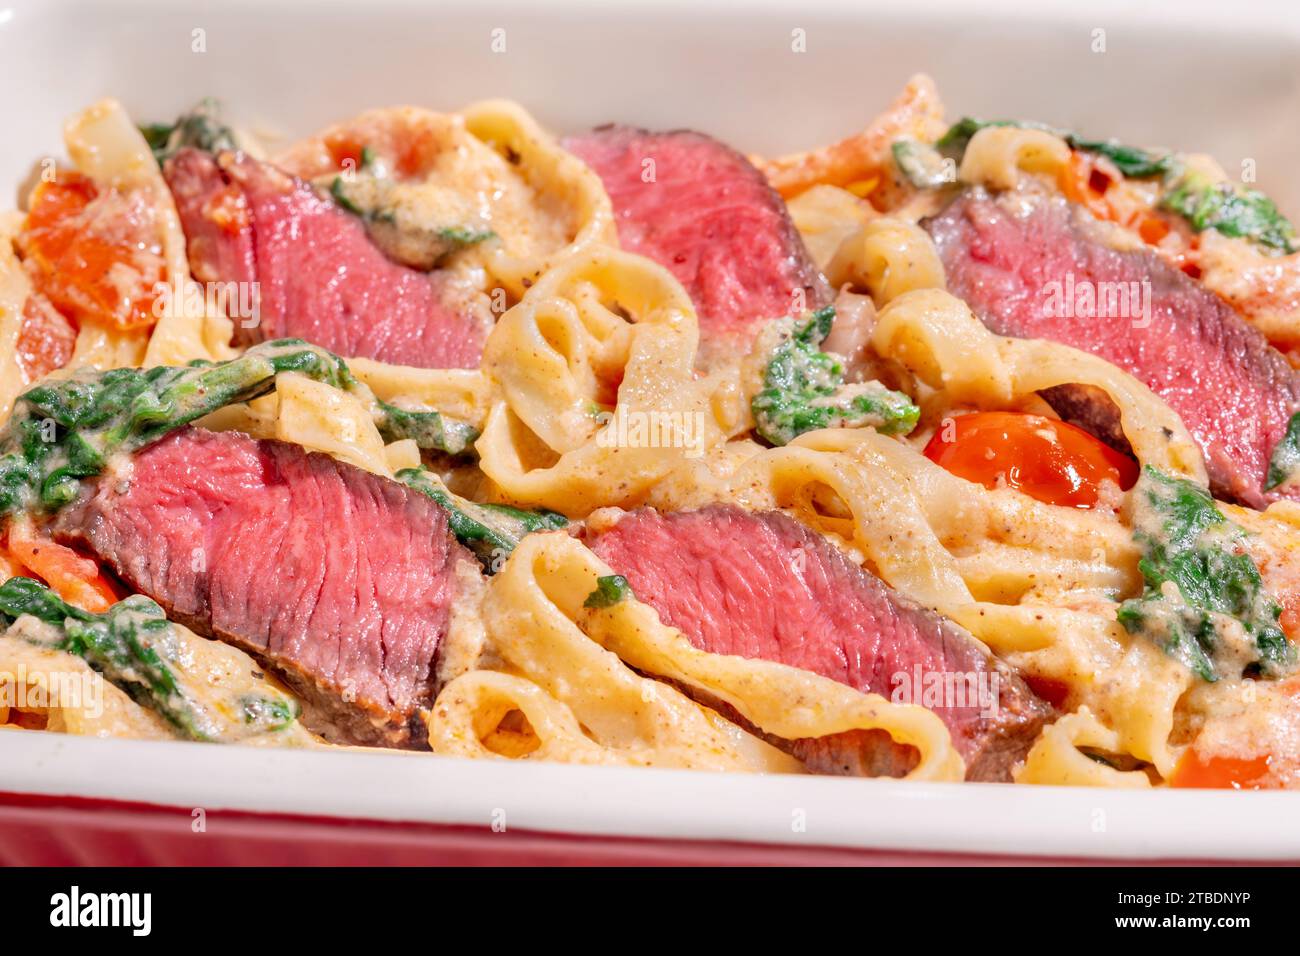 Creamy steak fettuccine pasta with spinach and tomatoes Stock Photo